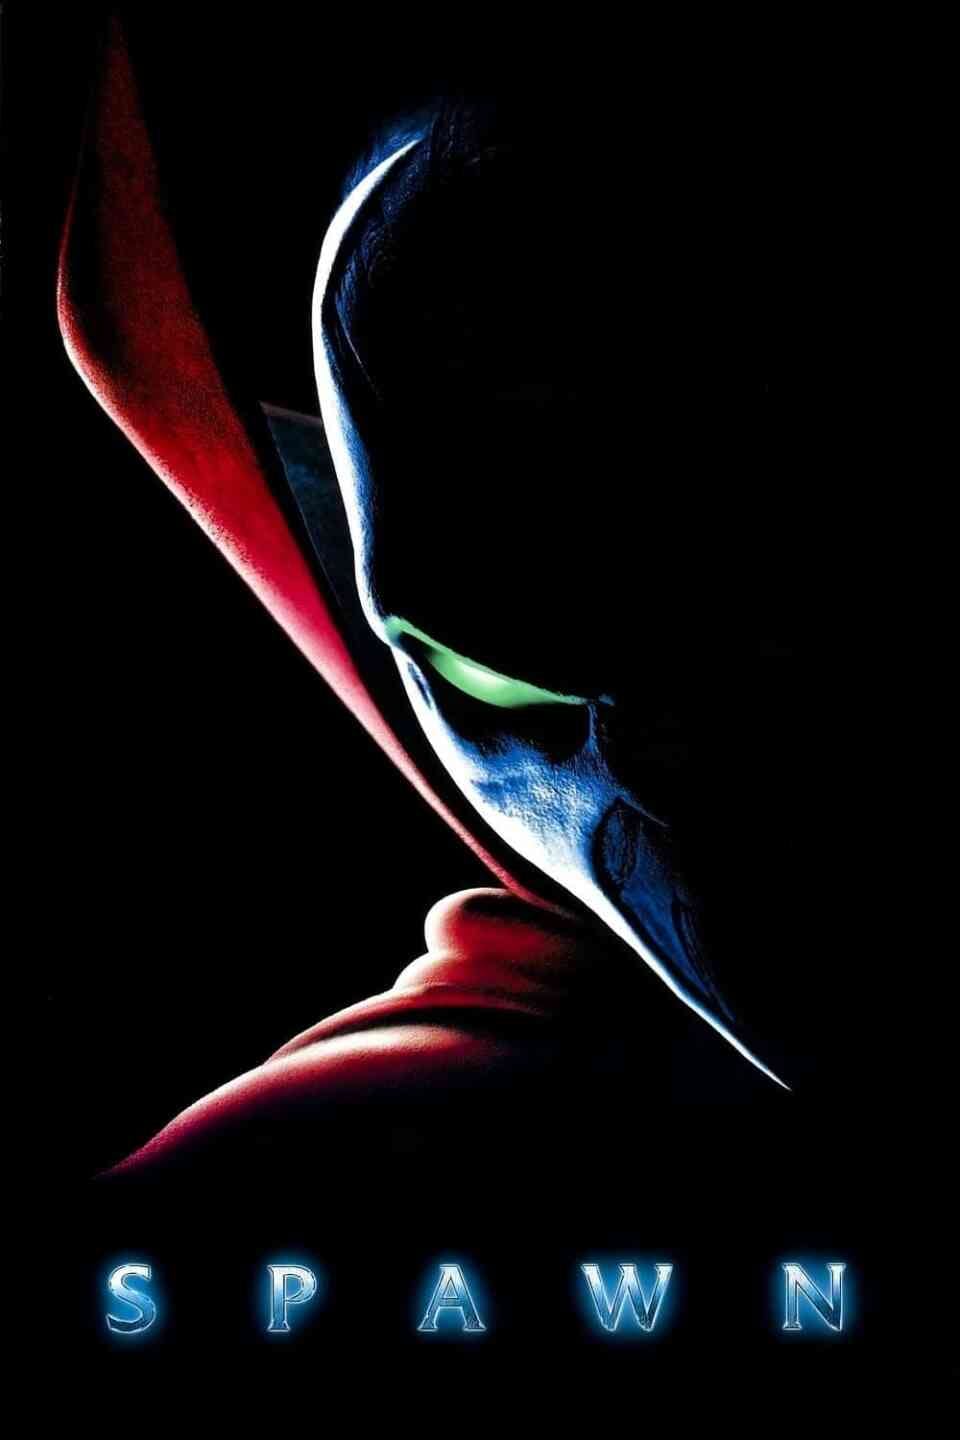 Read Spawn screenplay (poster)